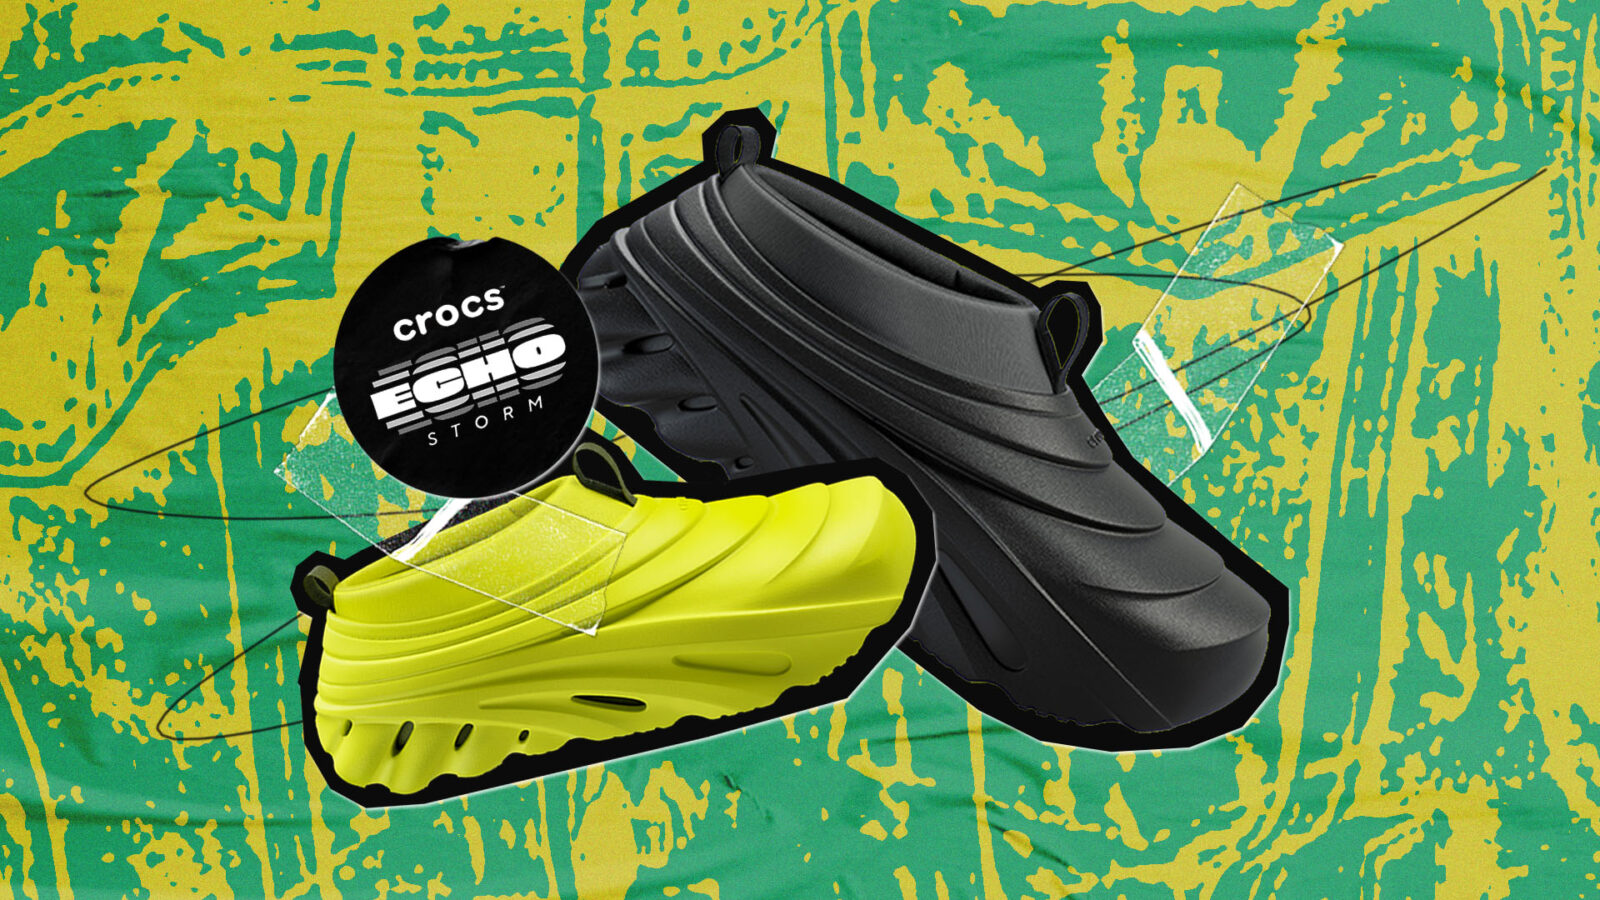 crocs are cool now echo storm